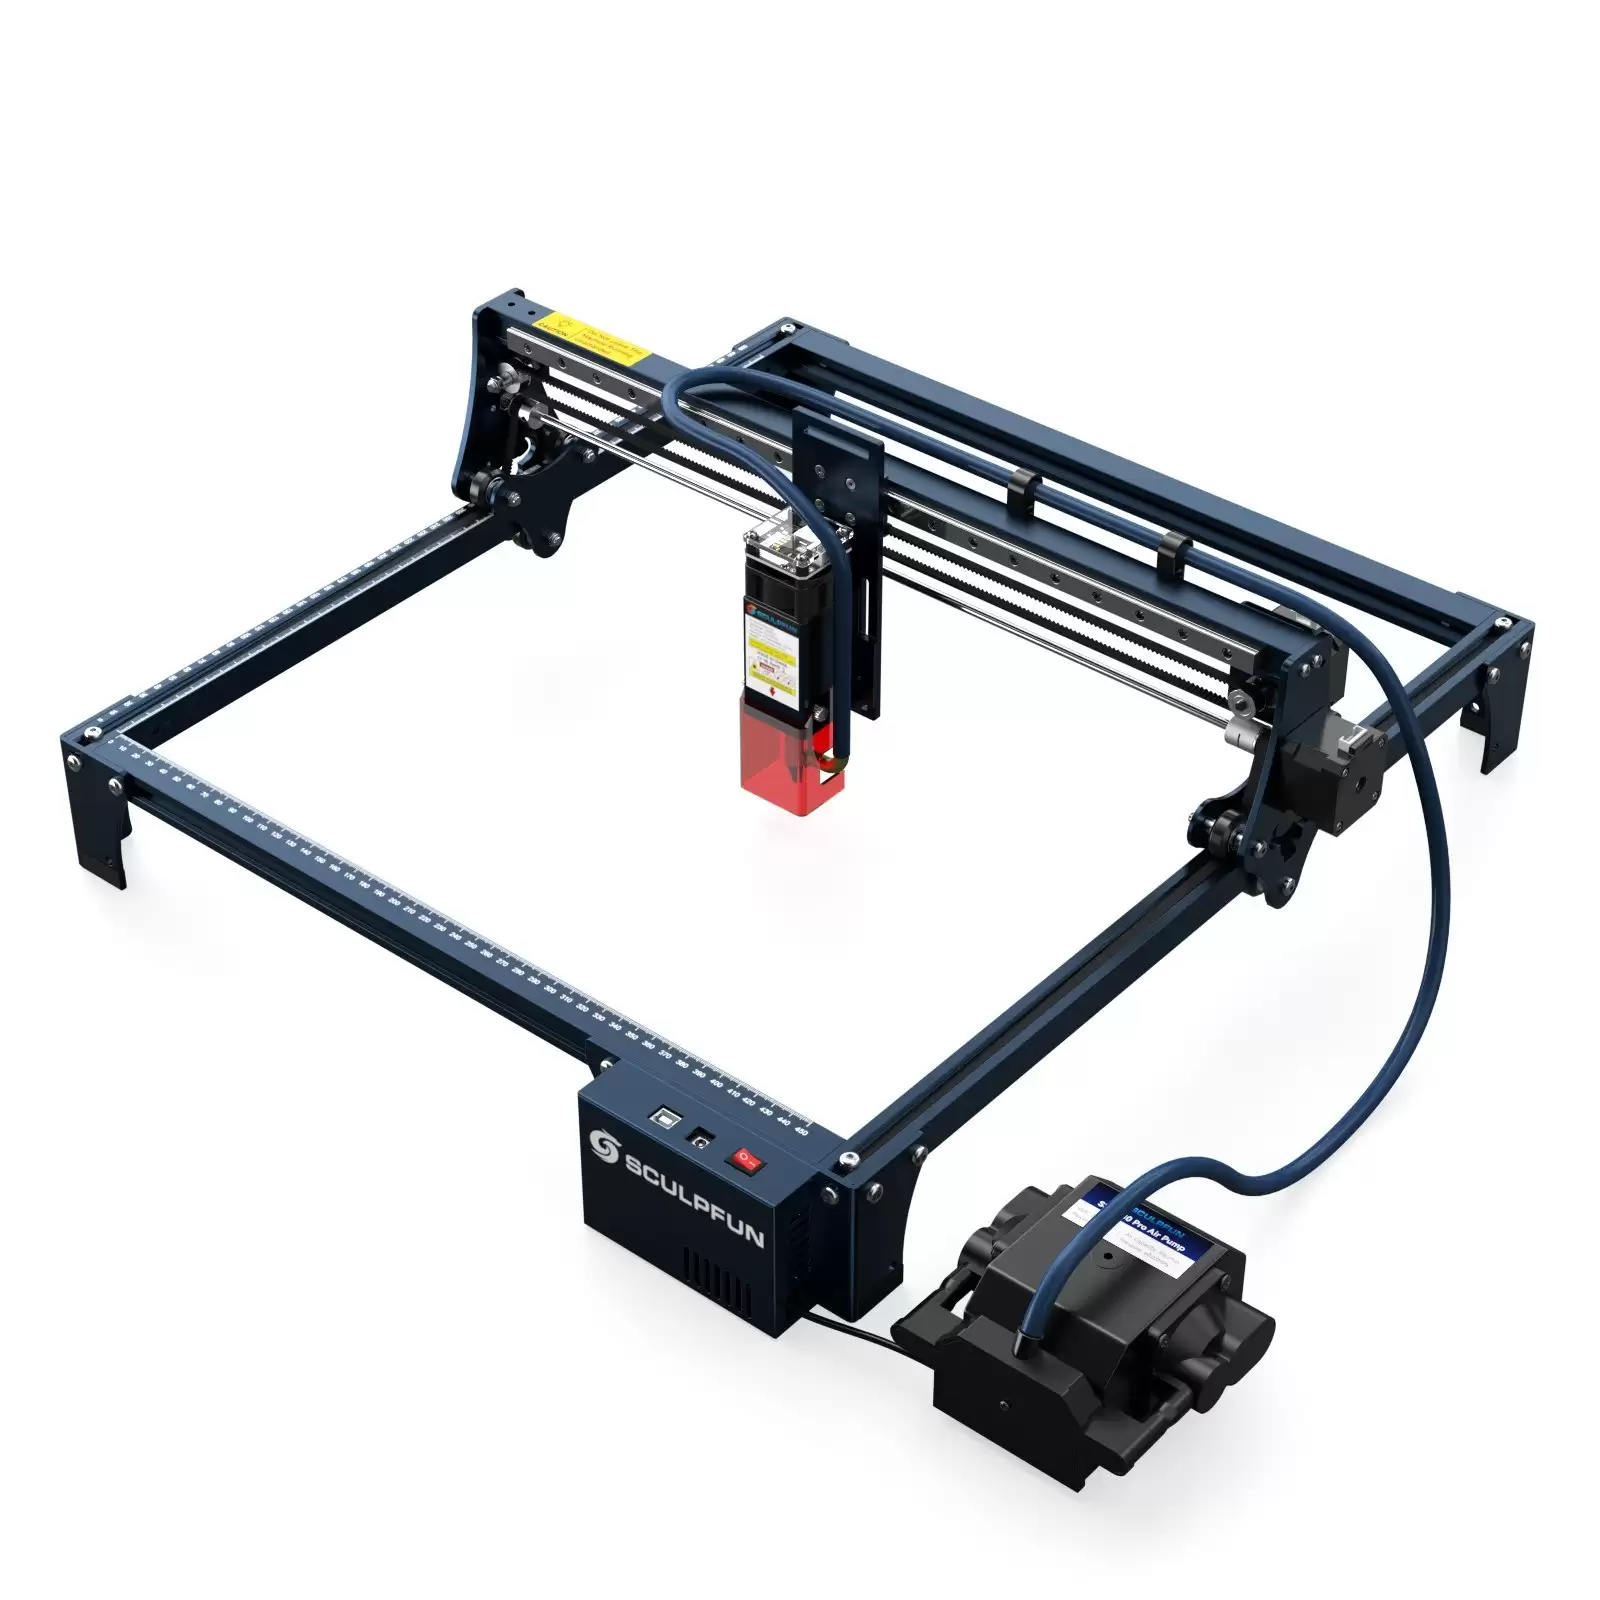 Order In Just $449.99 Sculpfun S30 Pro 10w Laser Engraver With This Tomtop Discount Voucher